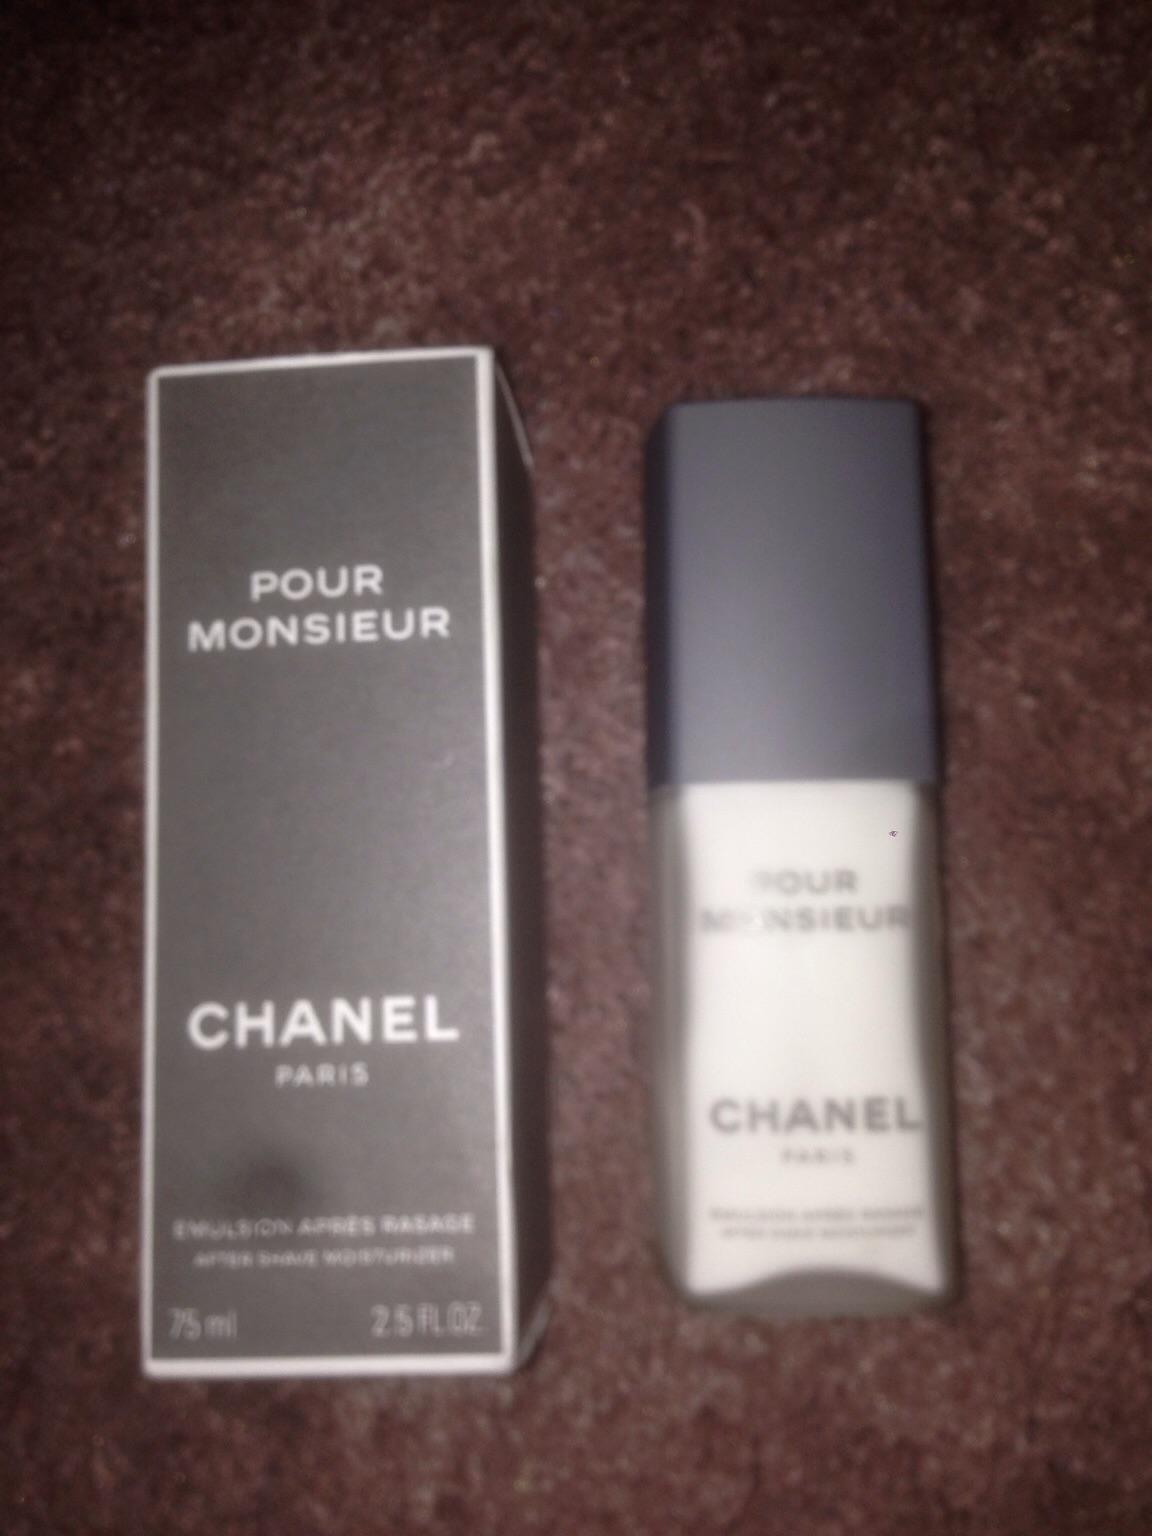 Chanel pour Monsieur after shave balm 75ml in SE16 London Borough of  Lewisham for £5.00 for sale